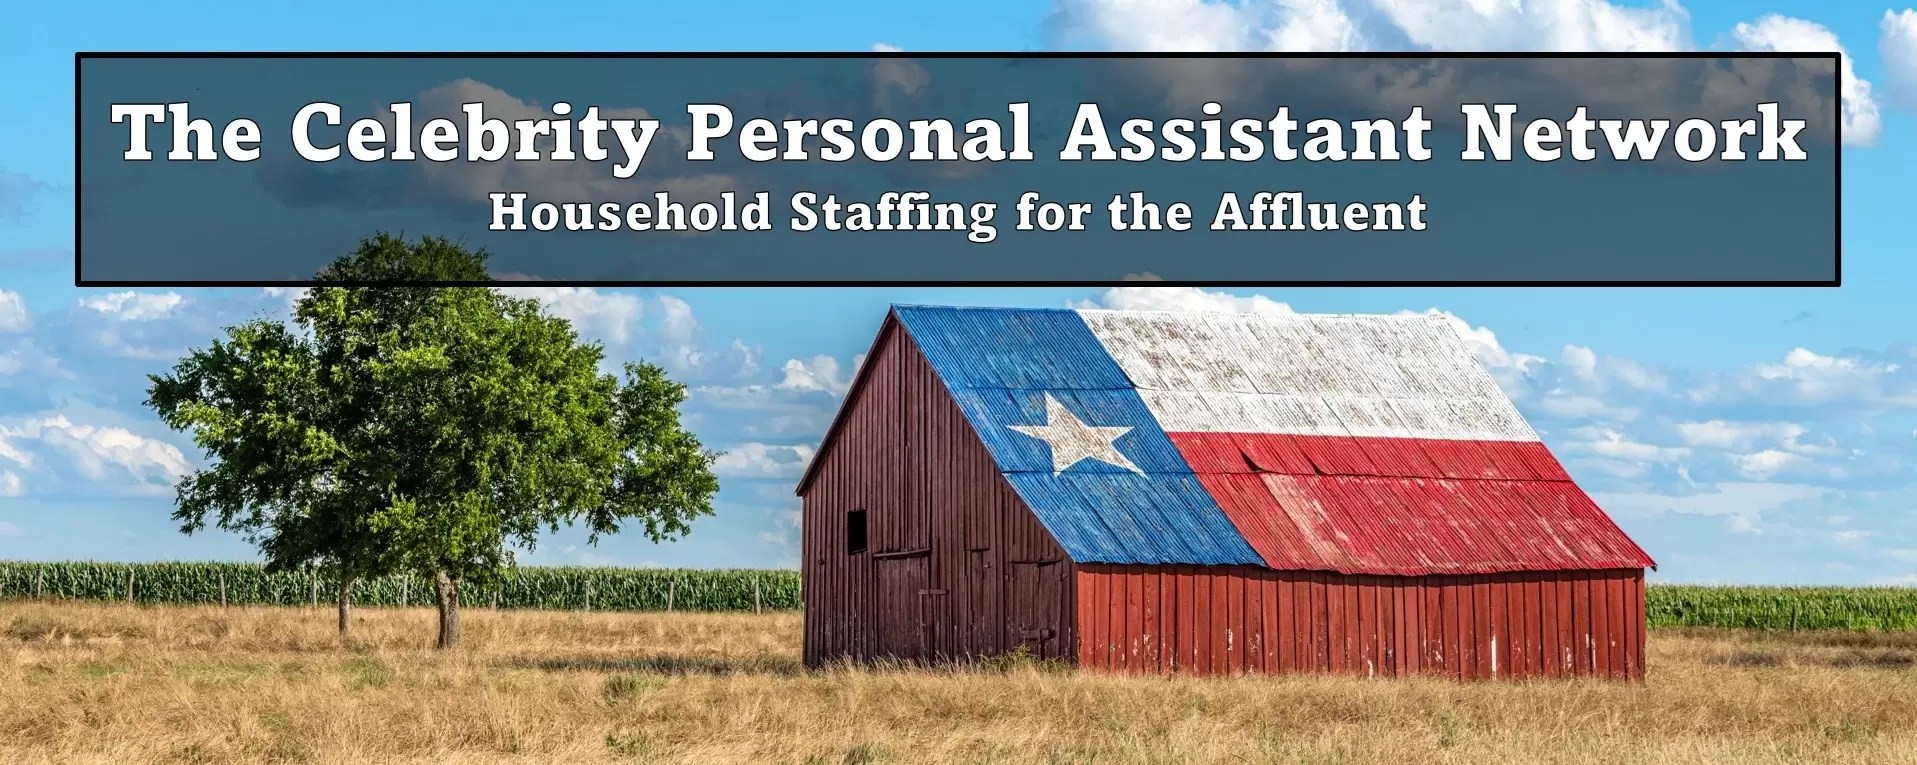 Texas household staffing agency